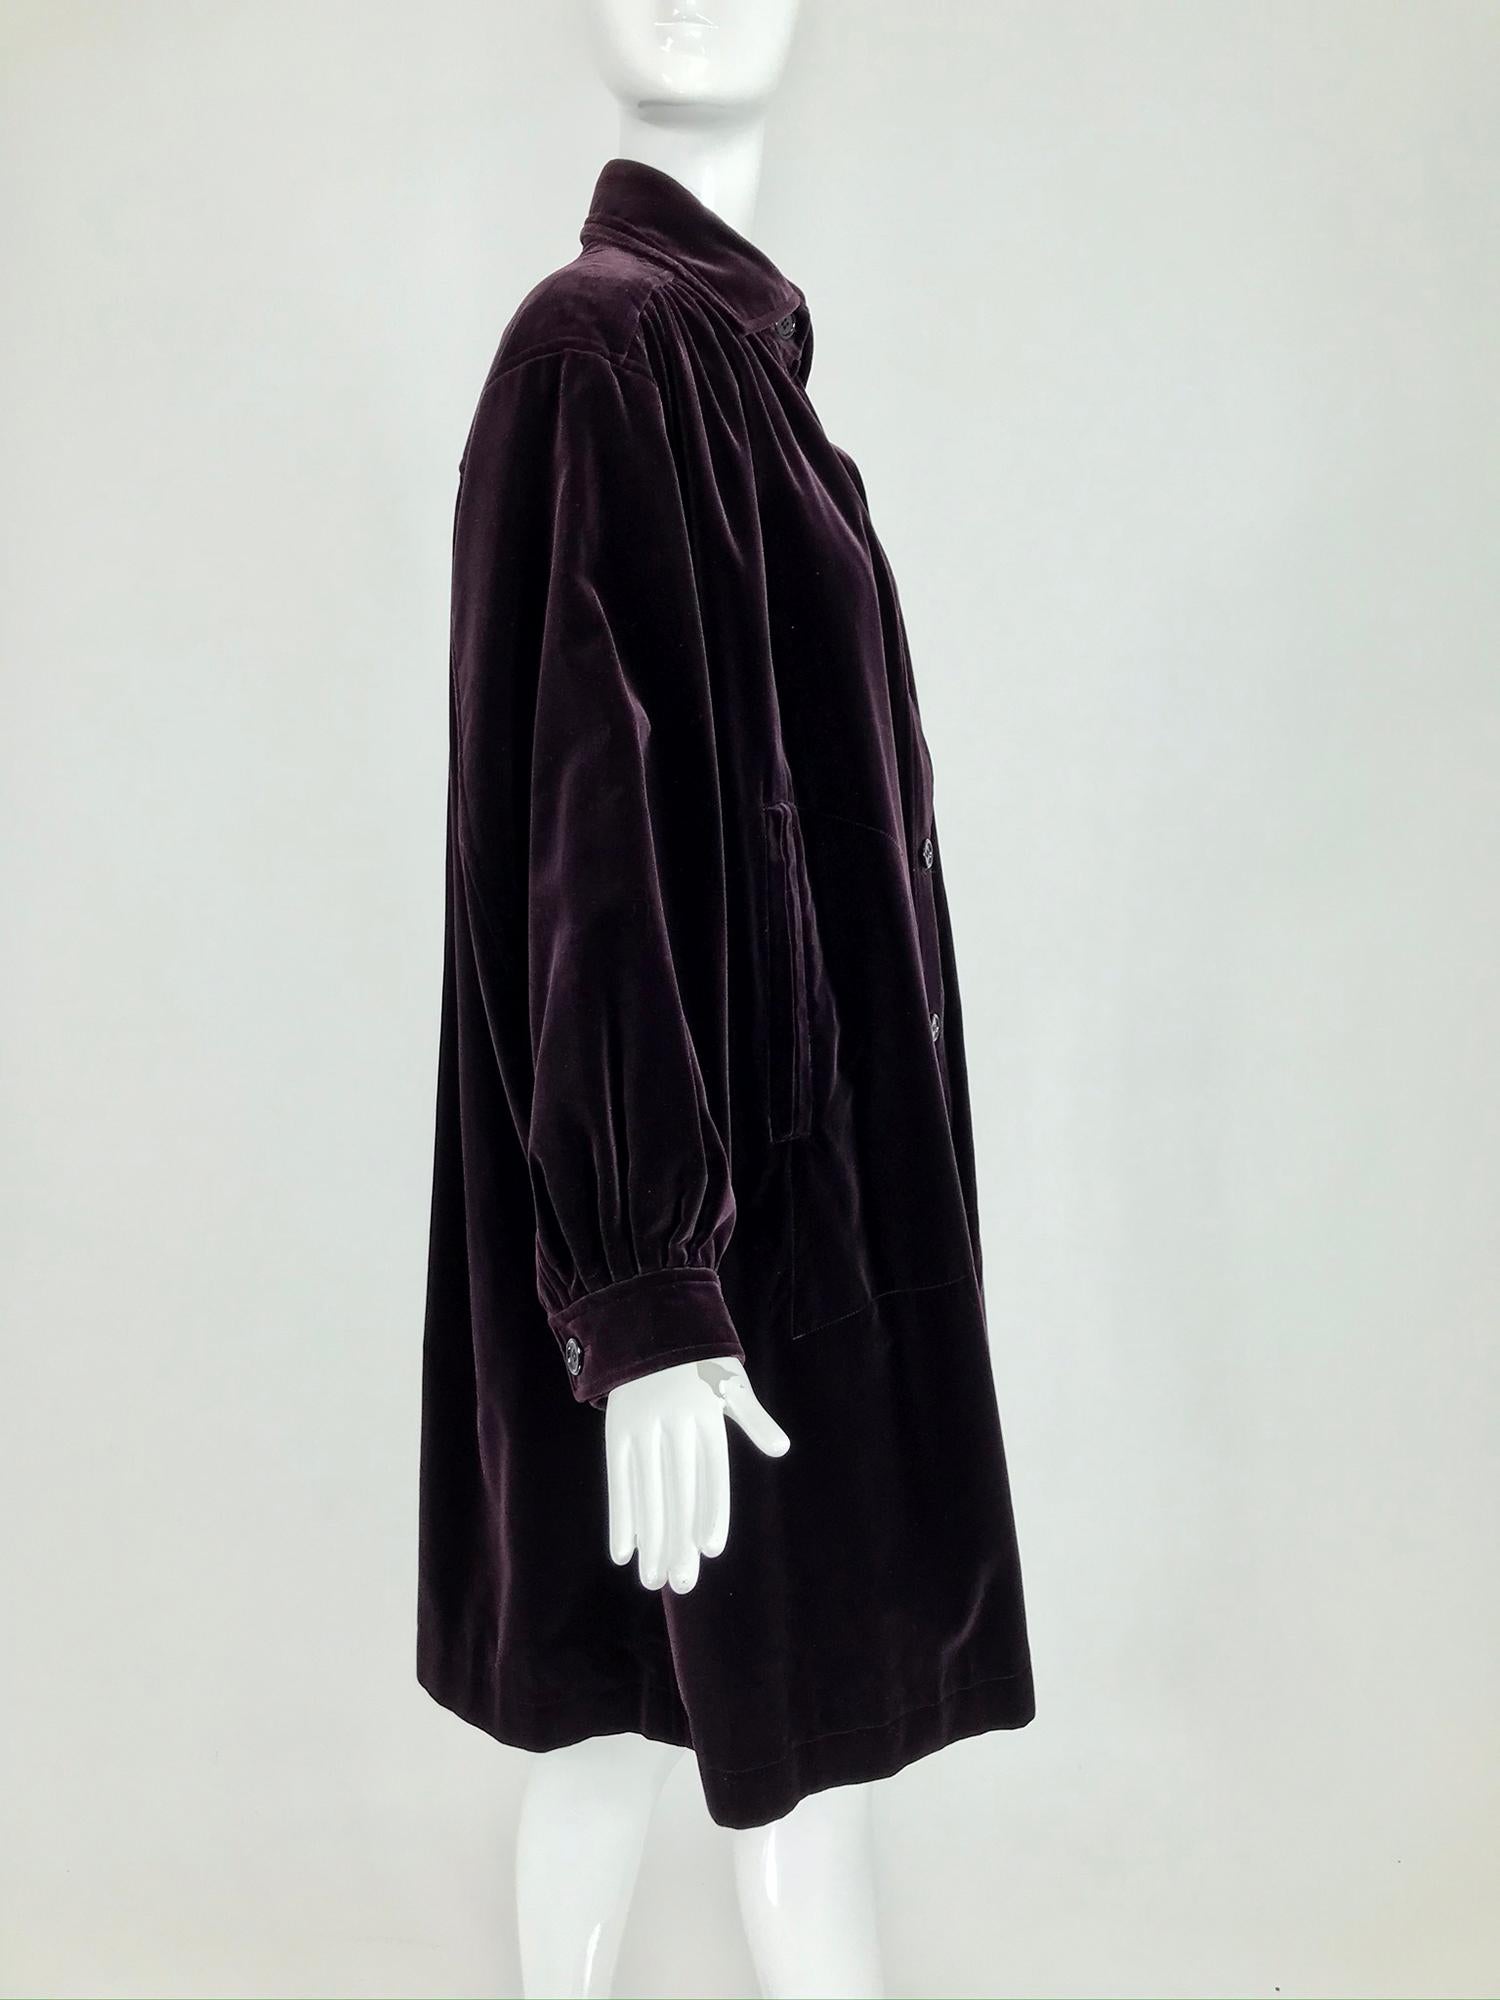 Yves Saint Laurent aubergine velvet smock coat from the 1970s. I love this coat, we've sold another in black a couple of years ago, but this colour is most amazing. Aubergine in cotton velvet, the colour changes depending on the light. The coat is a